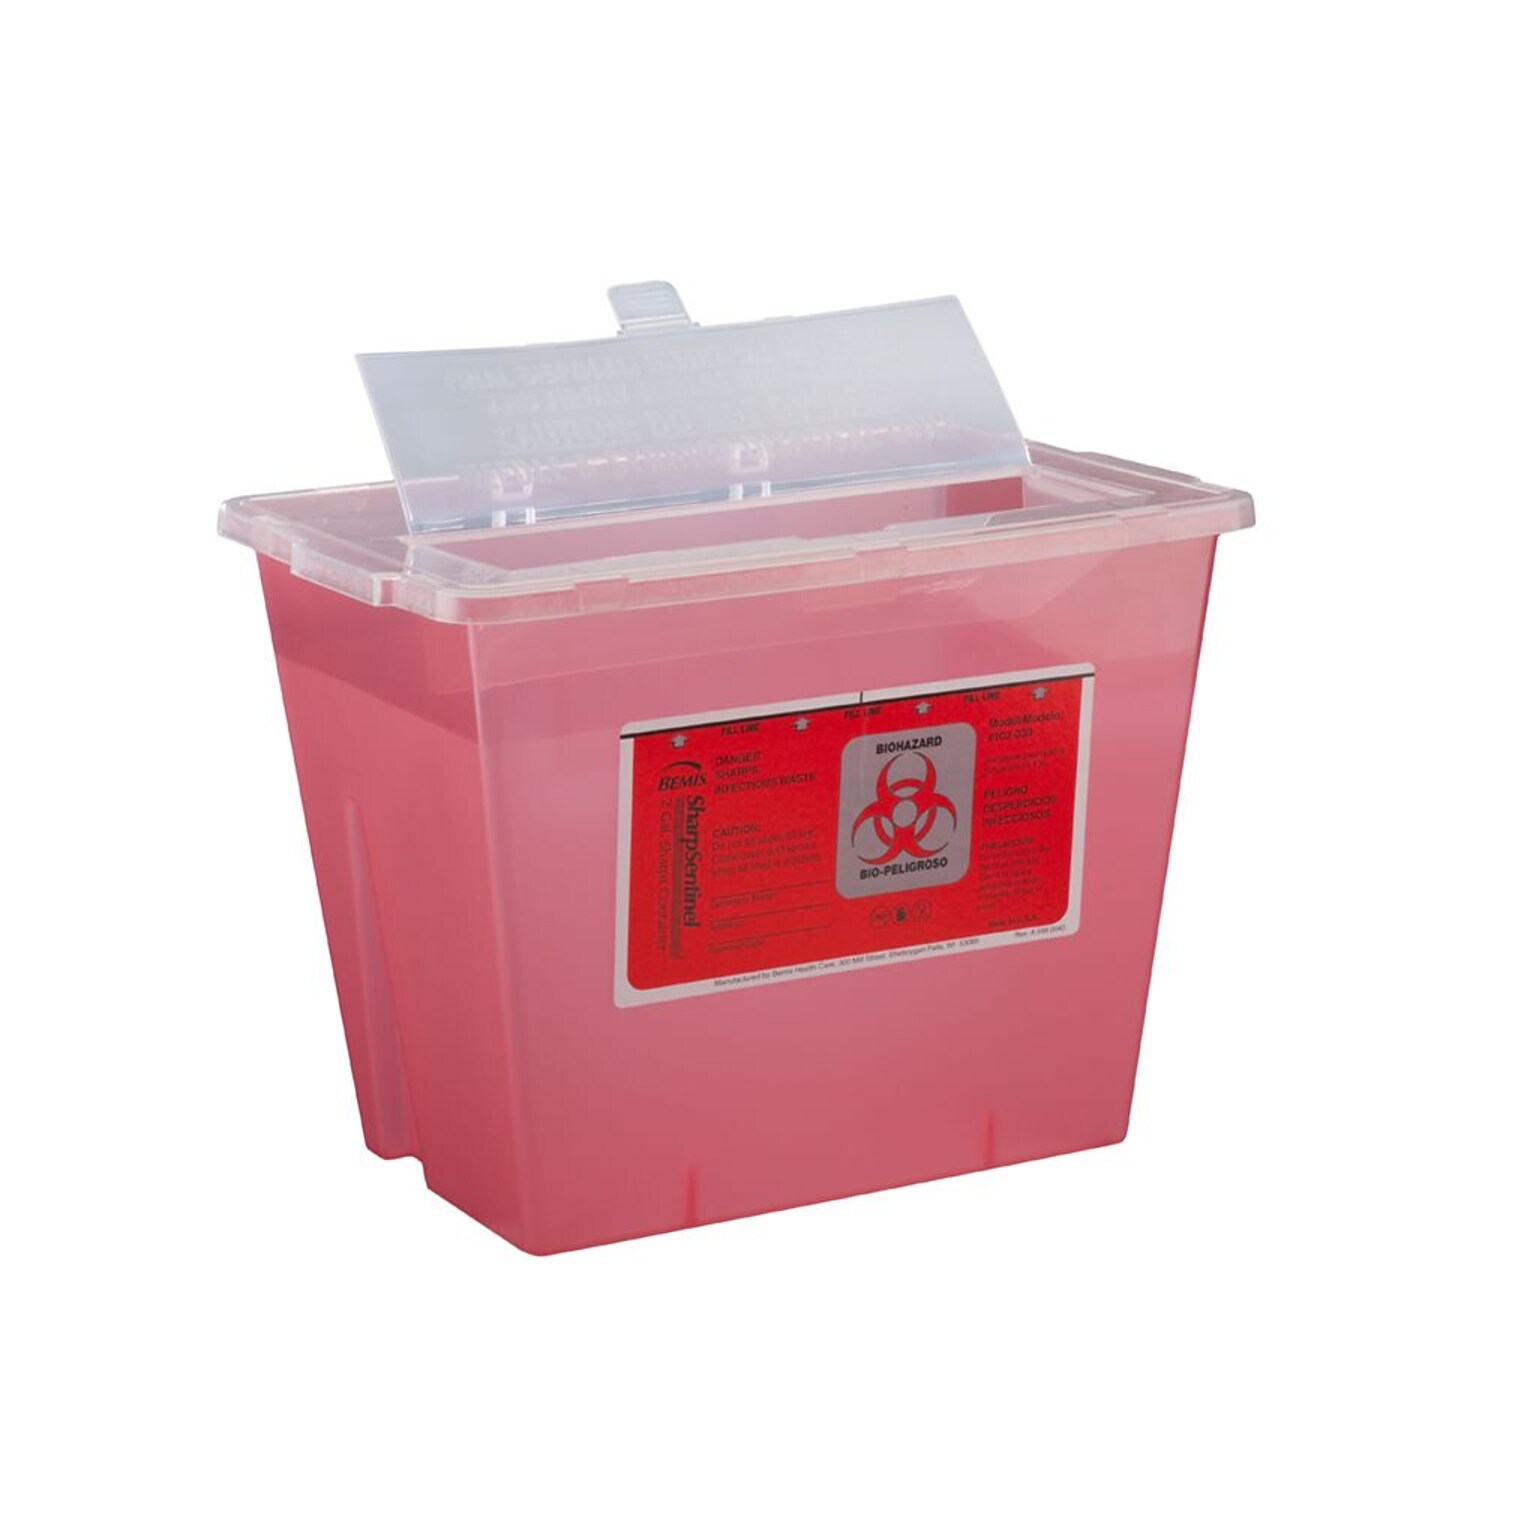 Bemis Sharps Container, 2 Gallon, Red, Box of 30 (102030-30)